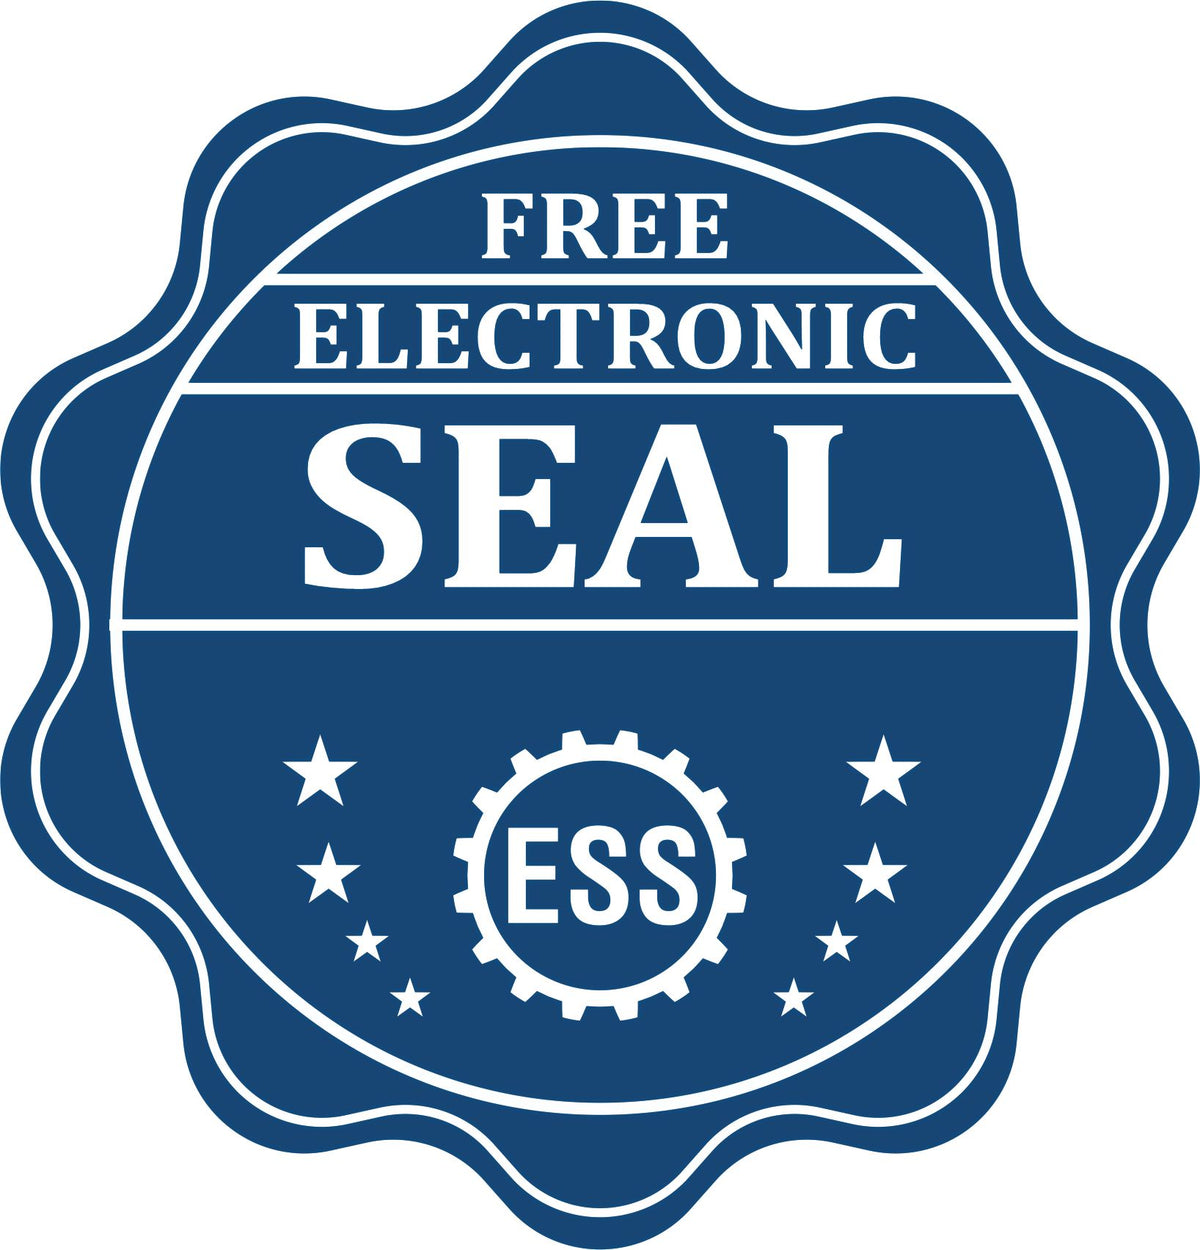 A badge showing a free electronic seal for the Oklahoma Desk Architect Embossing Seal with stars and the ESS gear on the emblem.